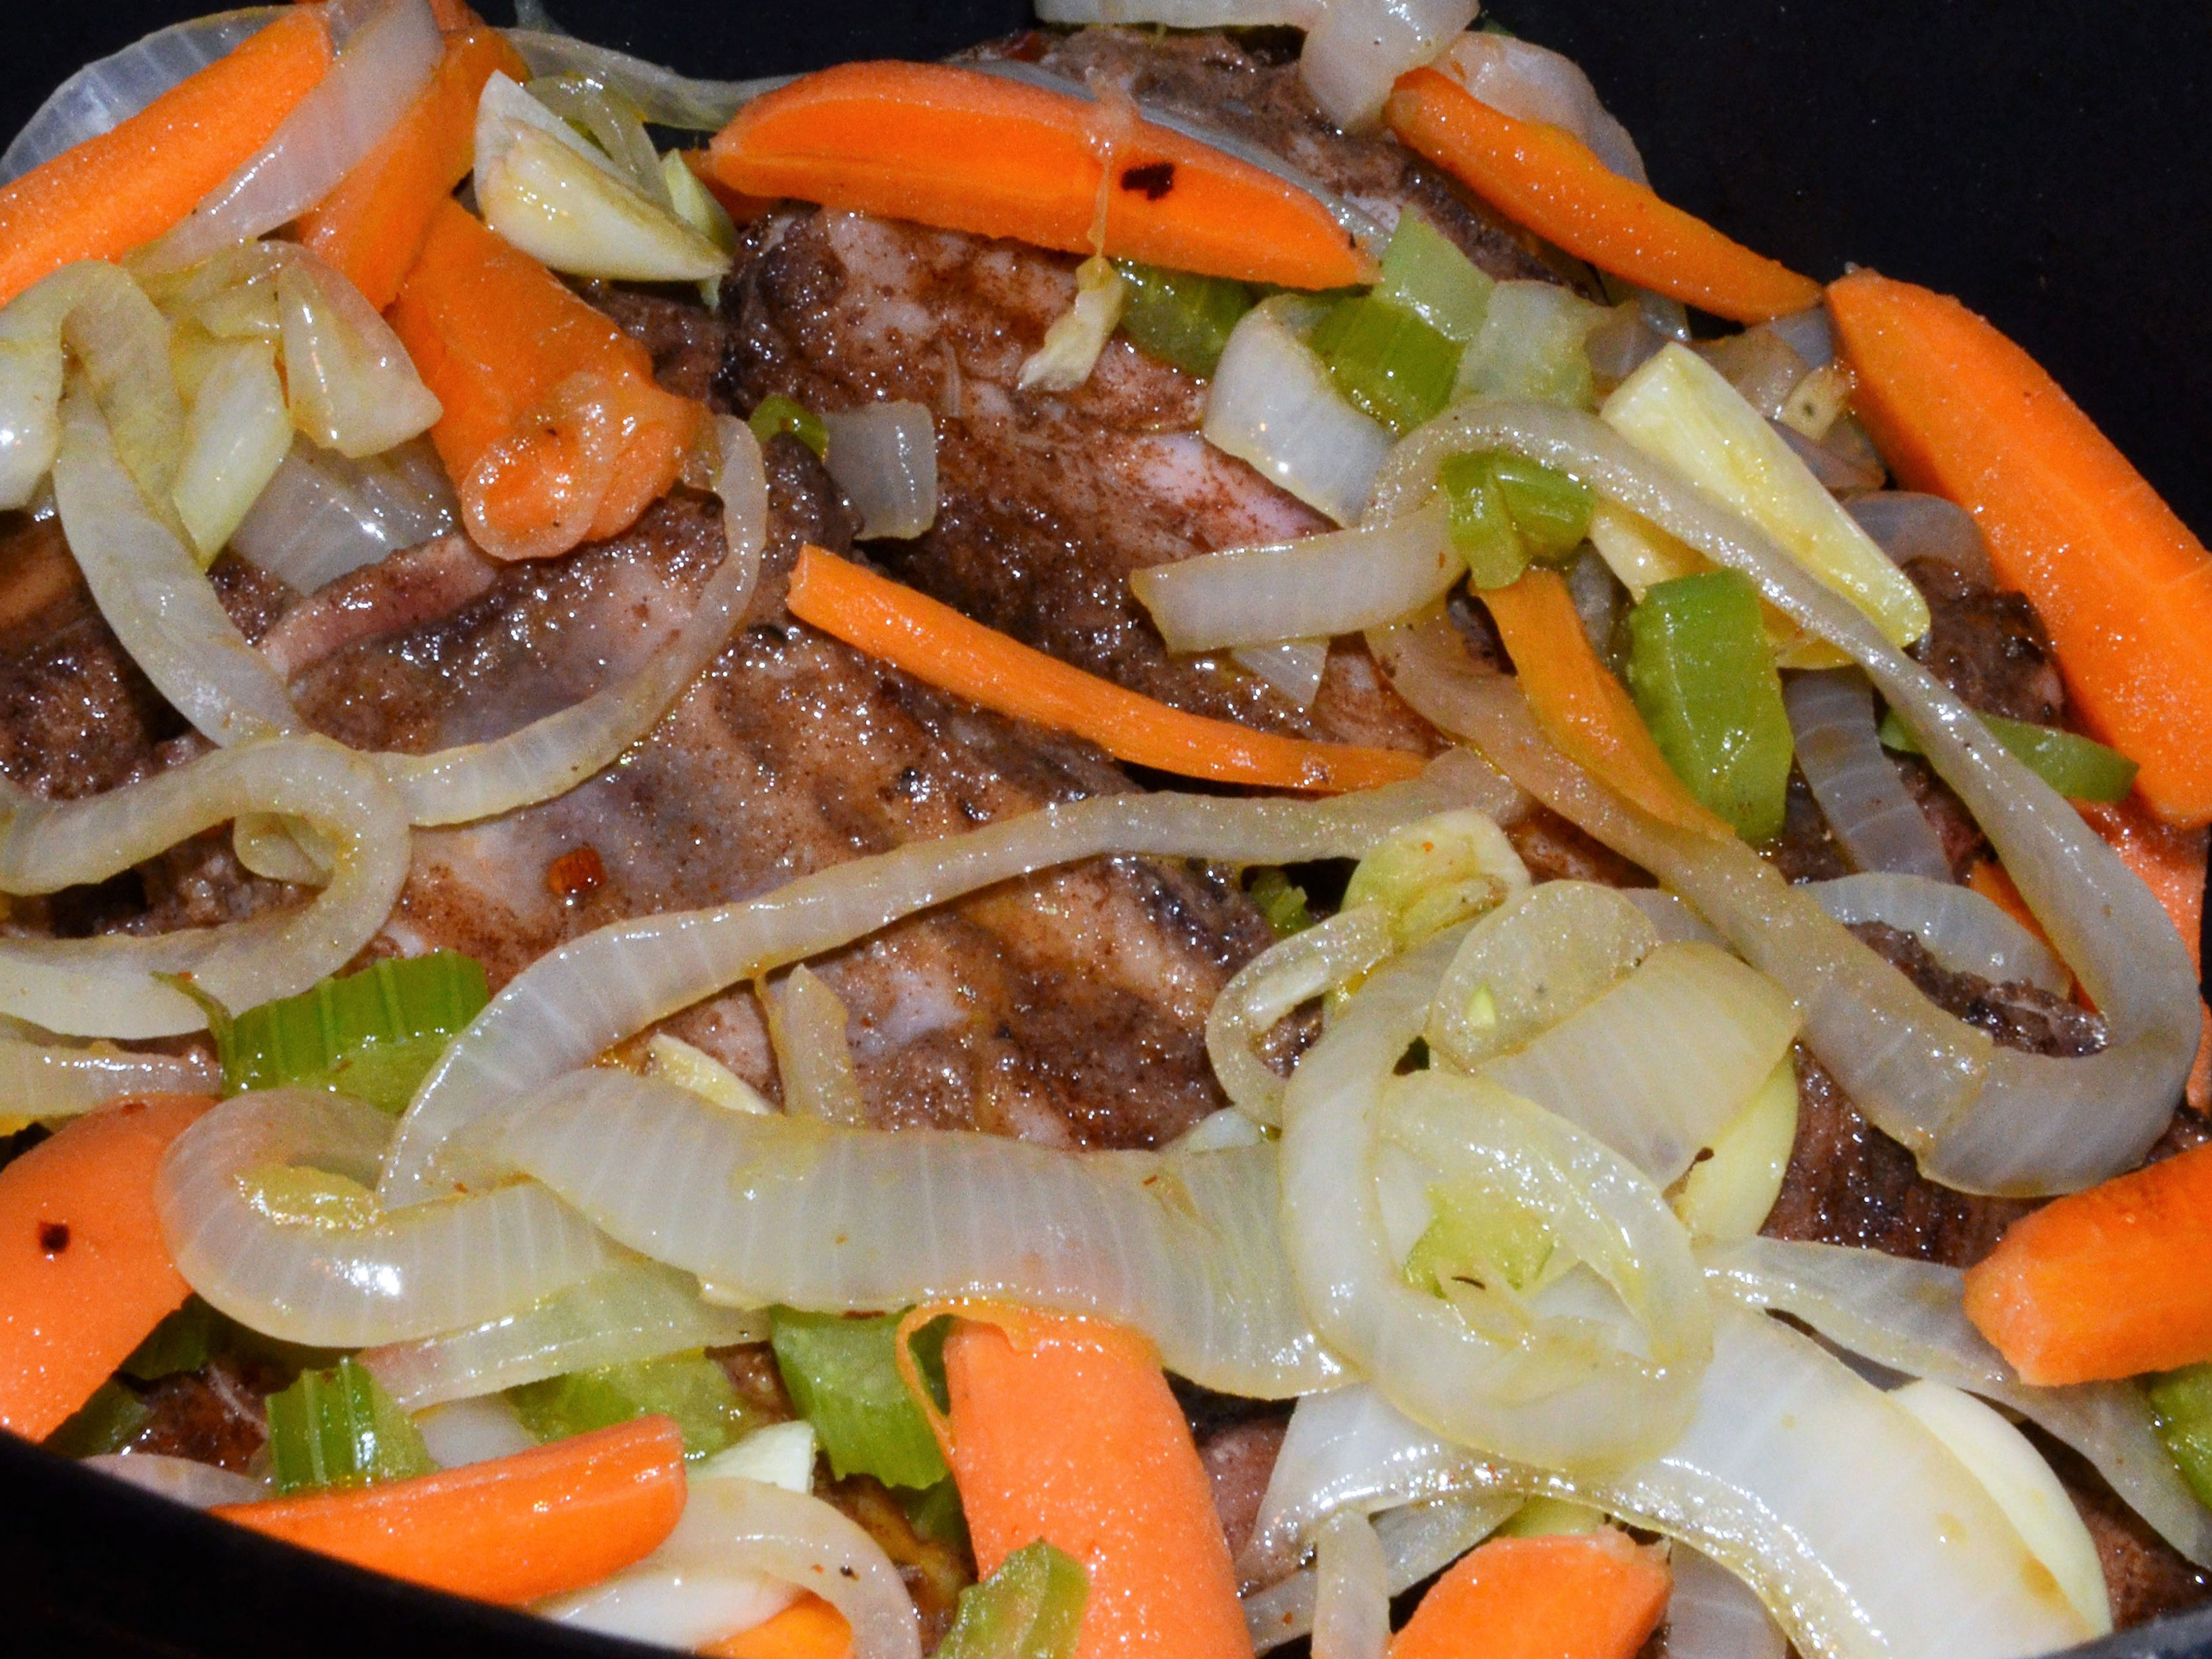 Short ribs with vegetables